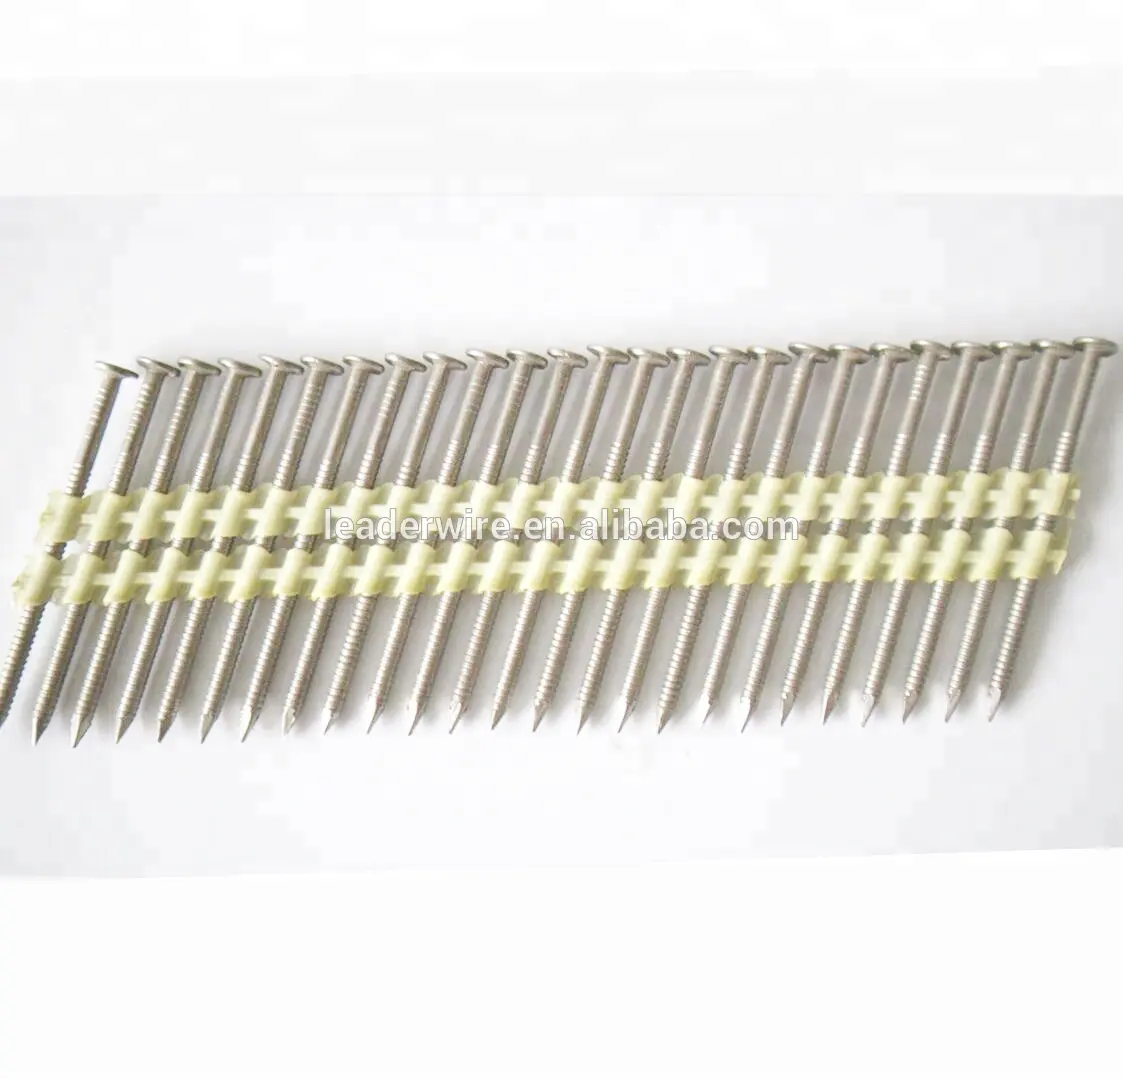 Stainless Steel 304 Plastic Strip Nails 21 Degree